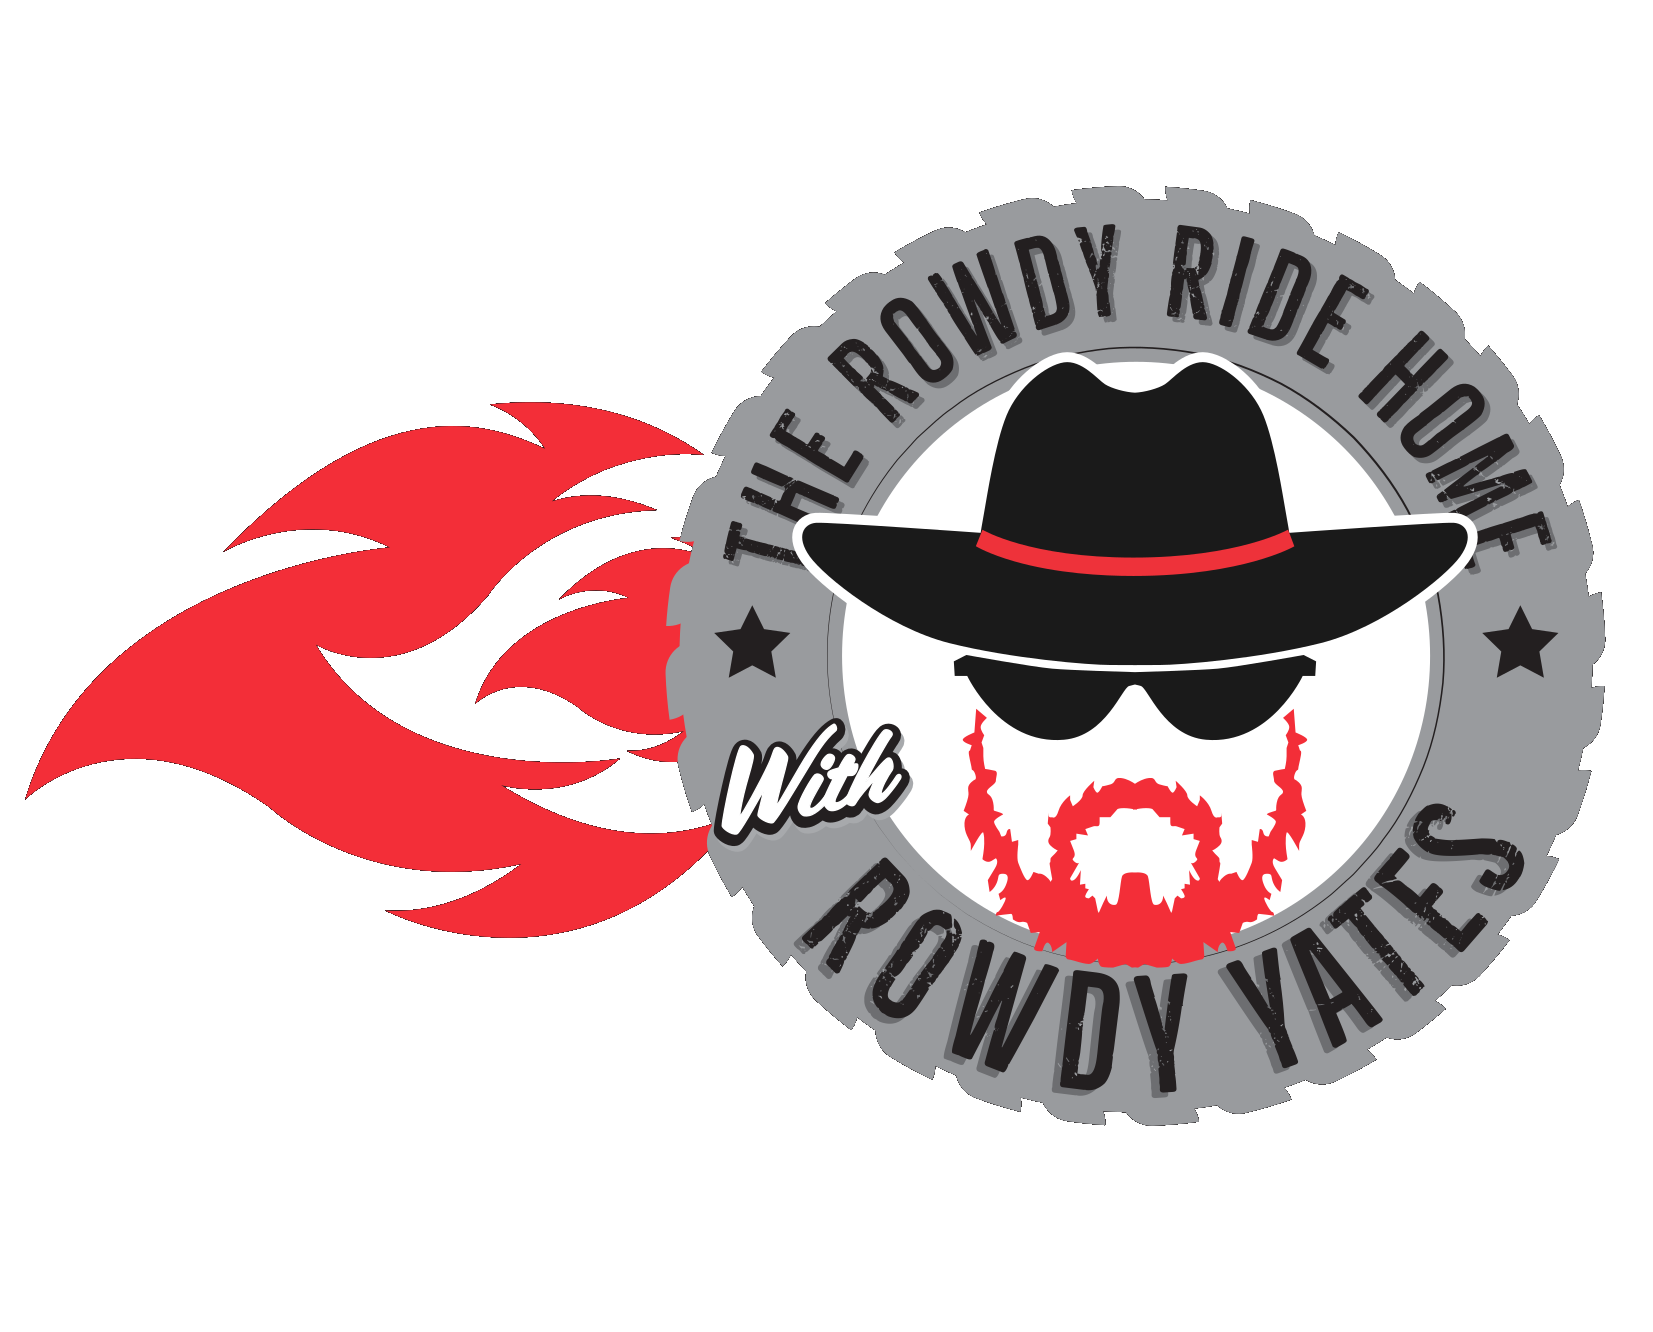  ‘The Rowdy Ride Home’ Picks Up New Affiliates